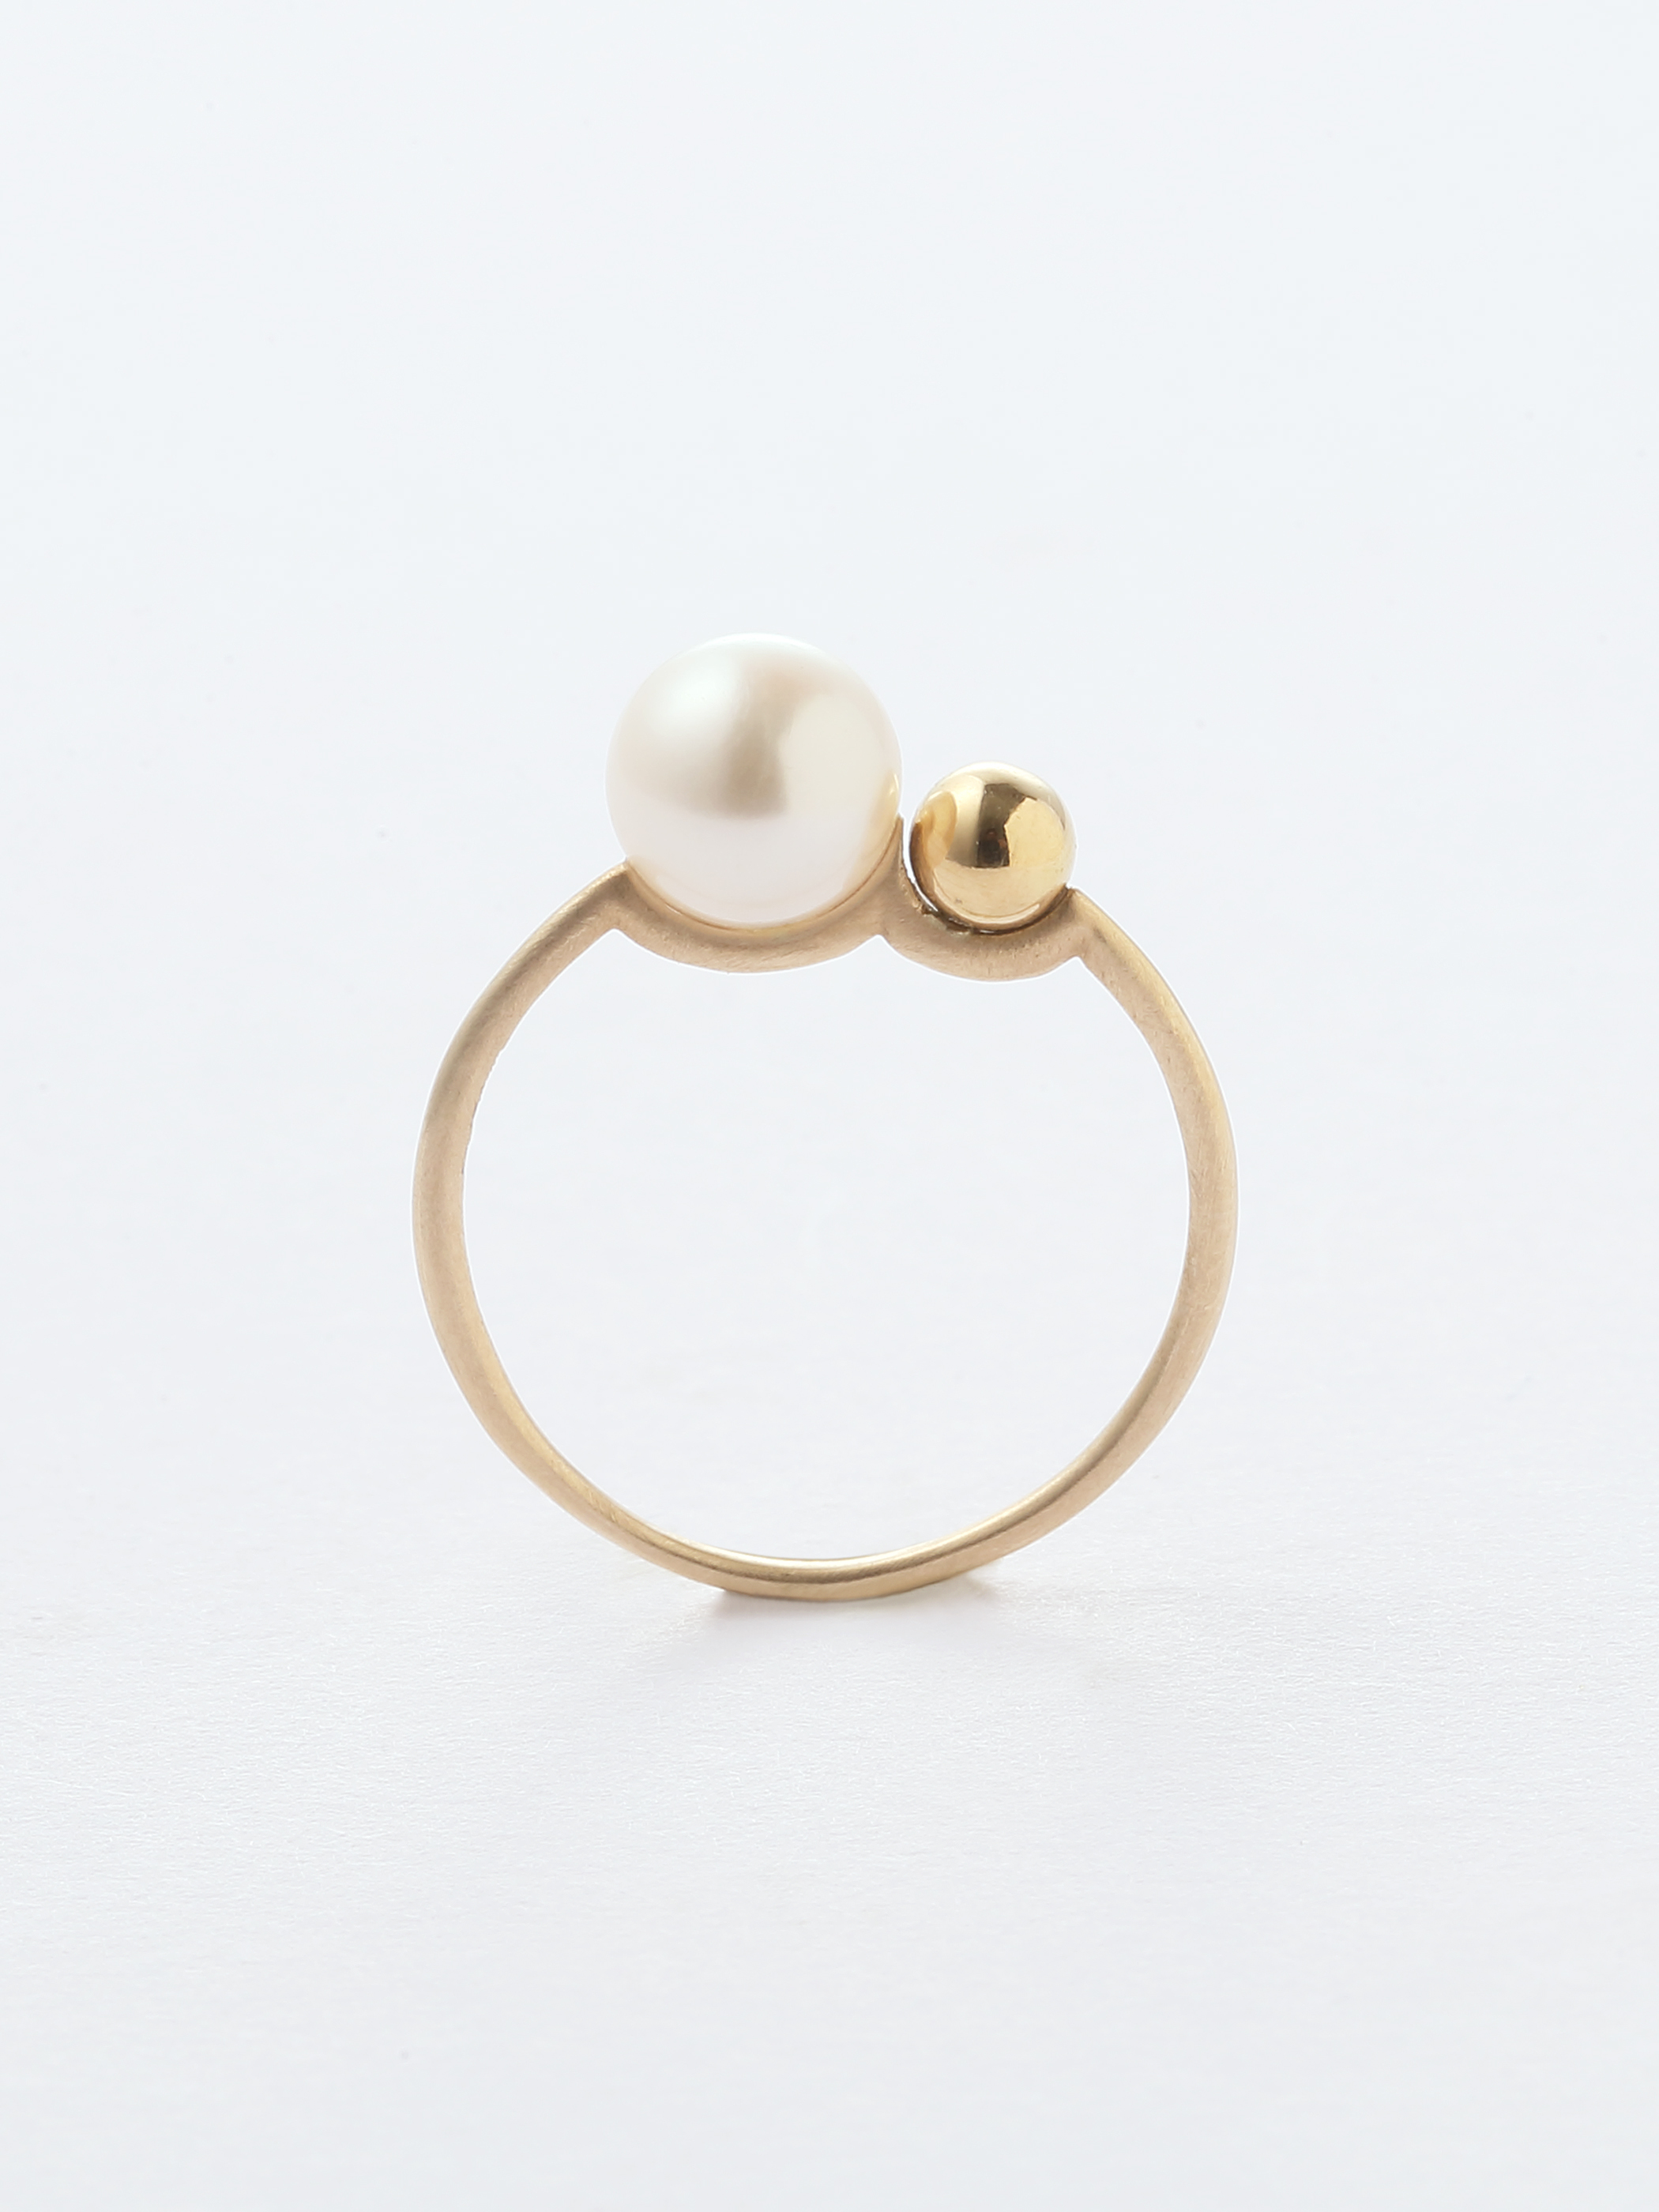 2 BUNNY TAIL RING